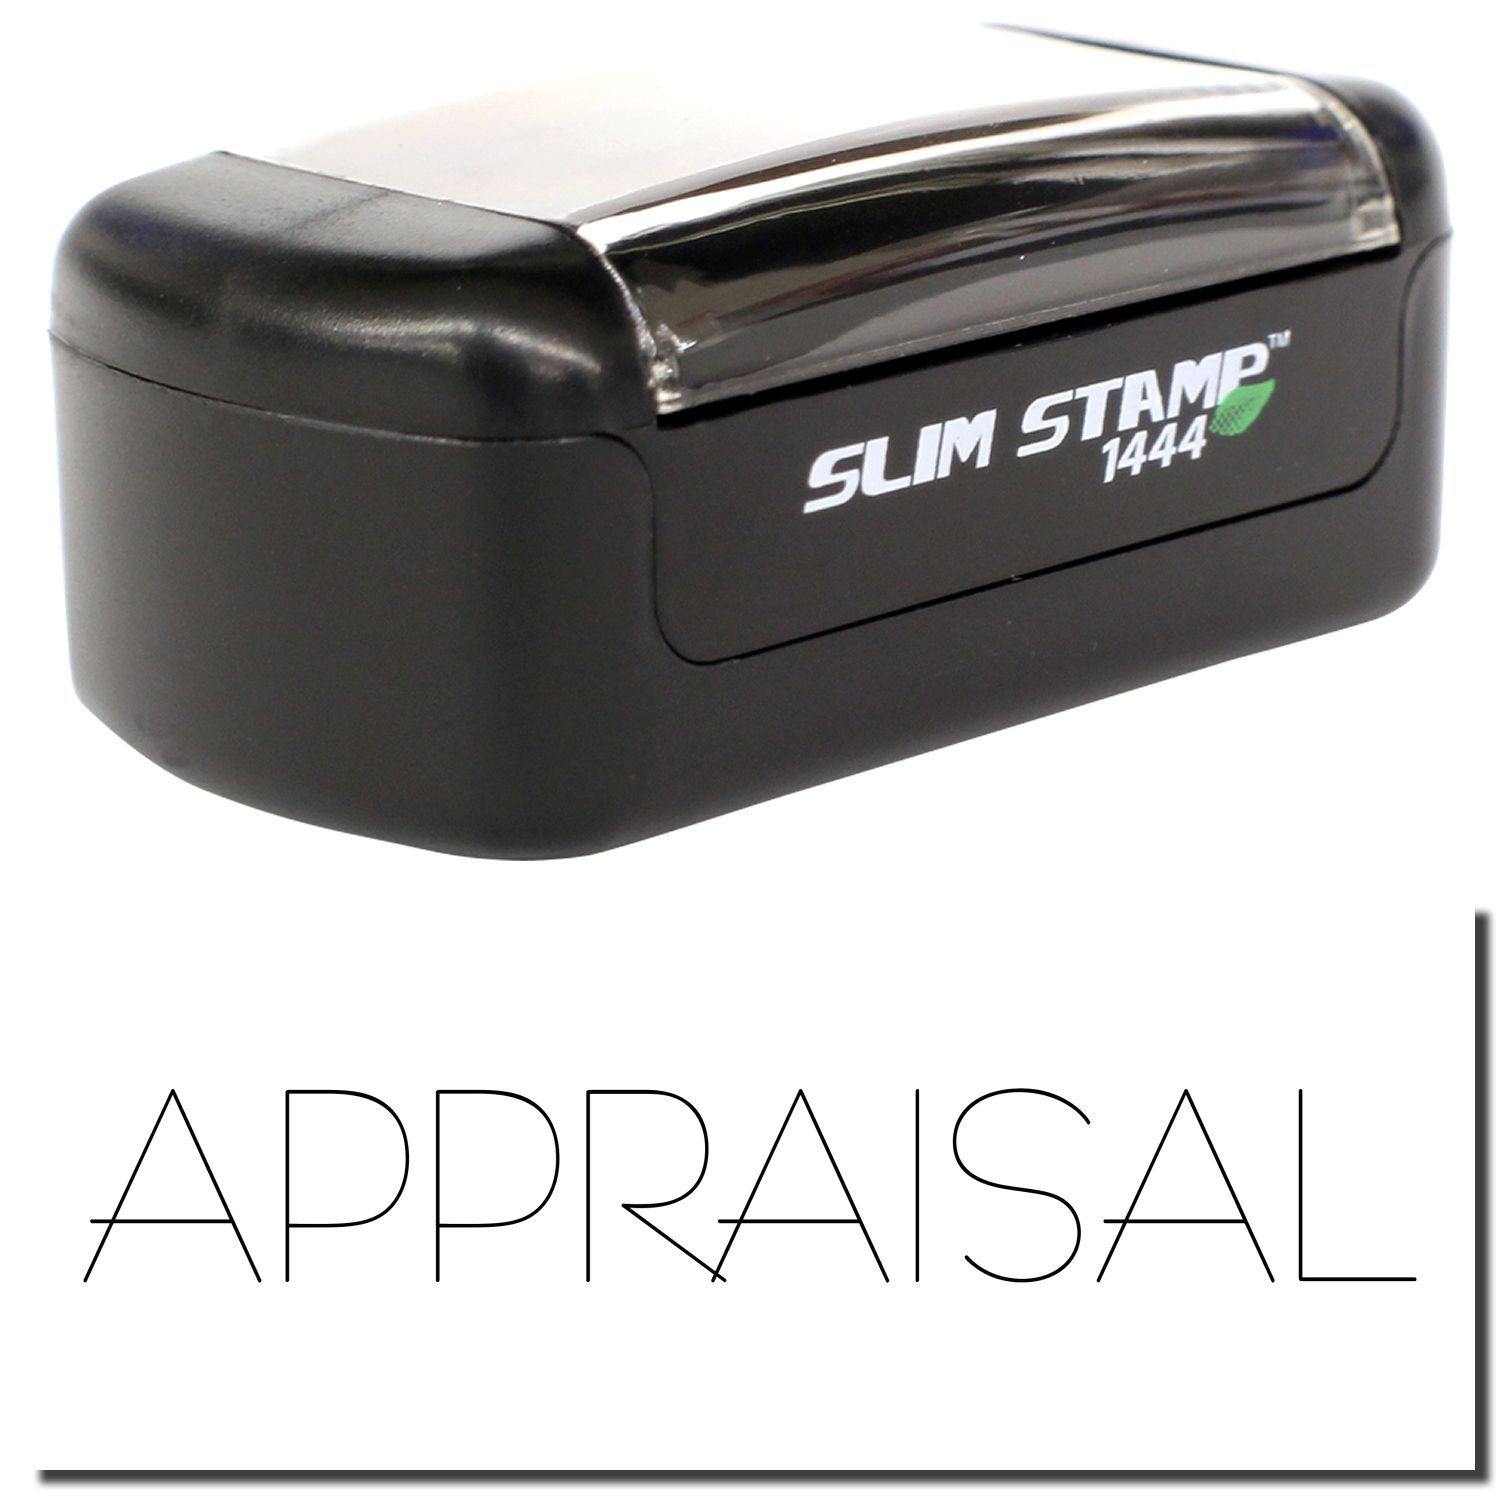 A stock office pre-inked stamp with a stamped image showing how the text "APPRAISAL" is displayed after stamping.